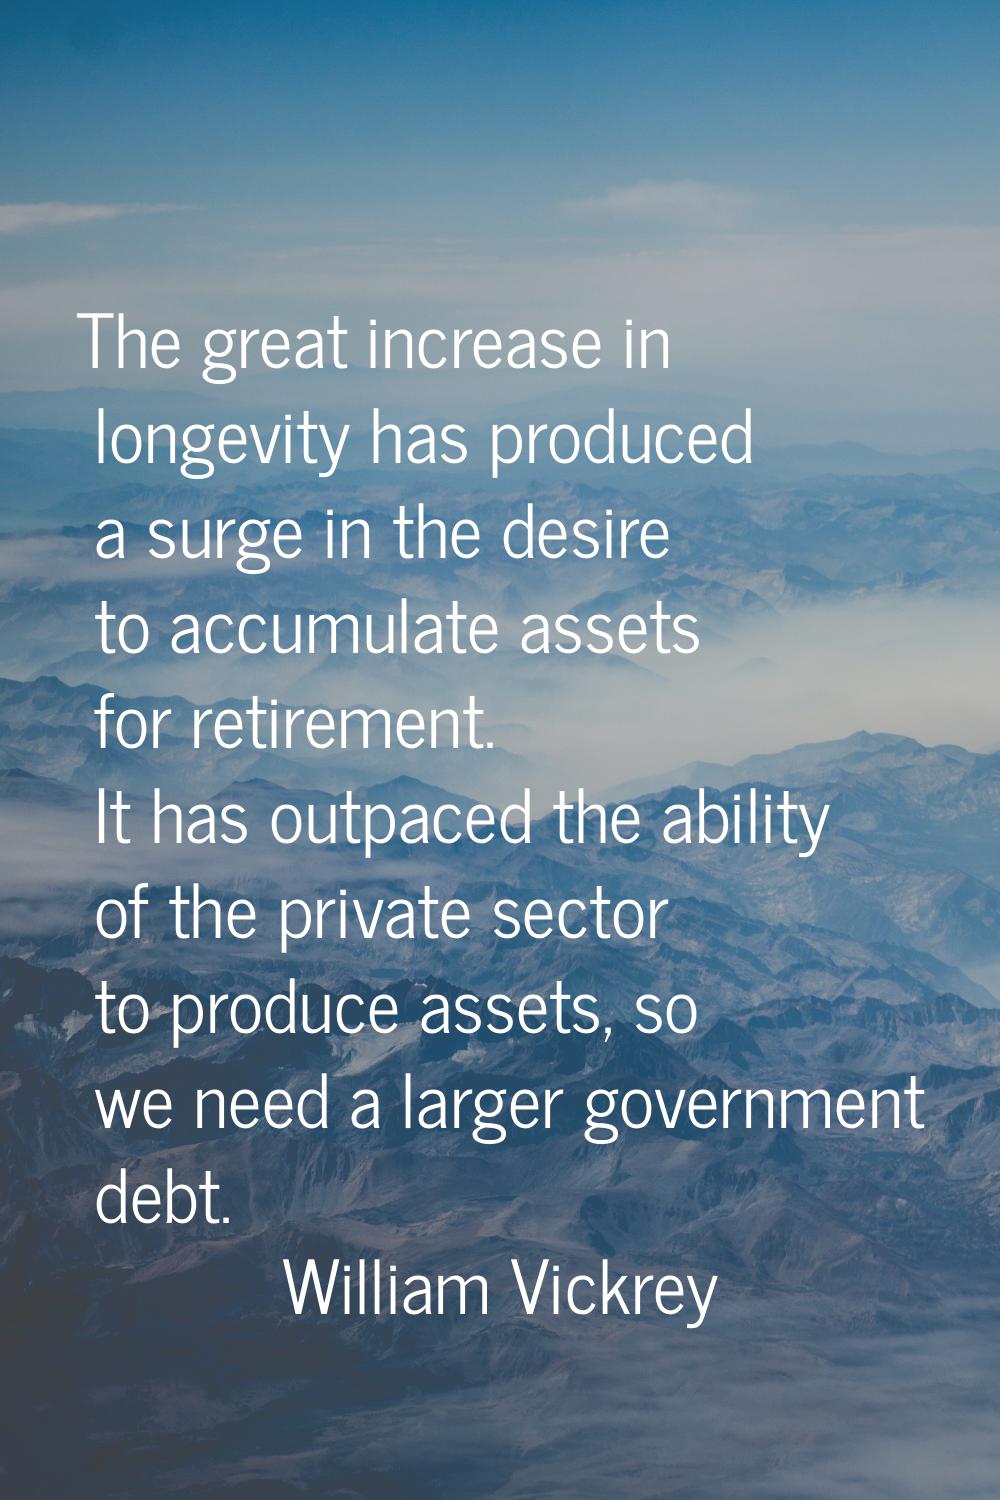 The great increase in longevity has produced a surge in the desire to accumulate assets for retirem